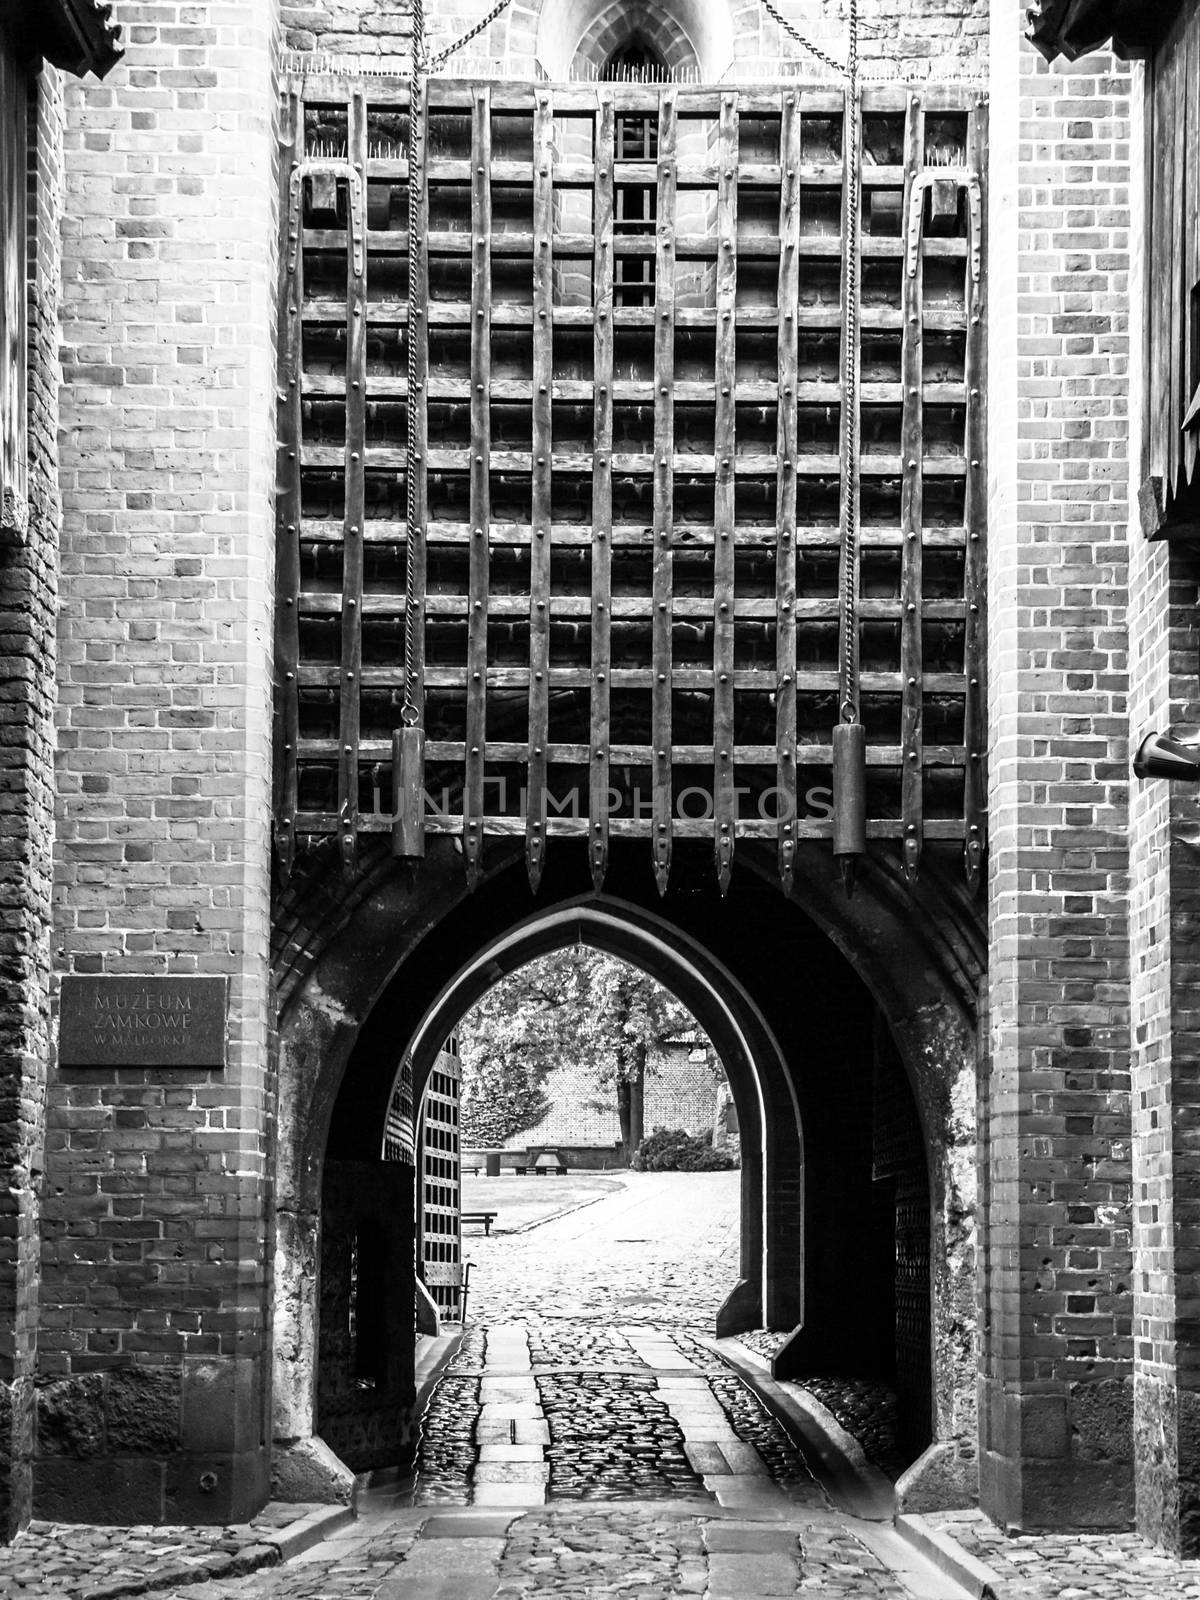 Medieval castle gate with iron bars. Black and white image.